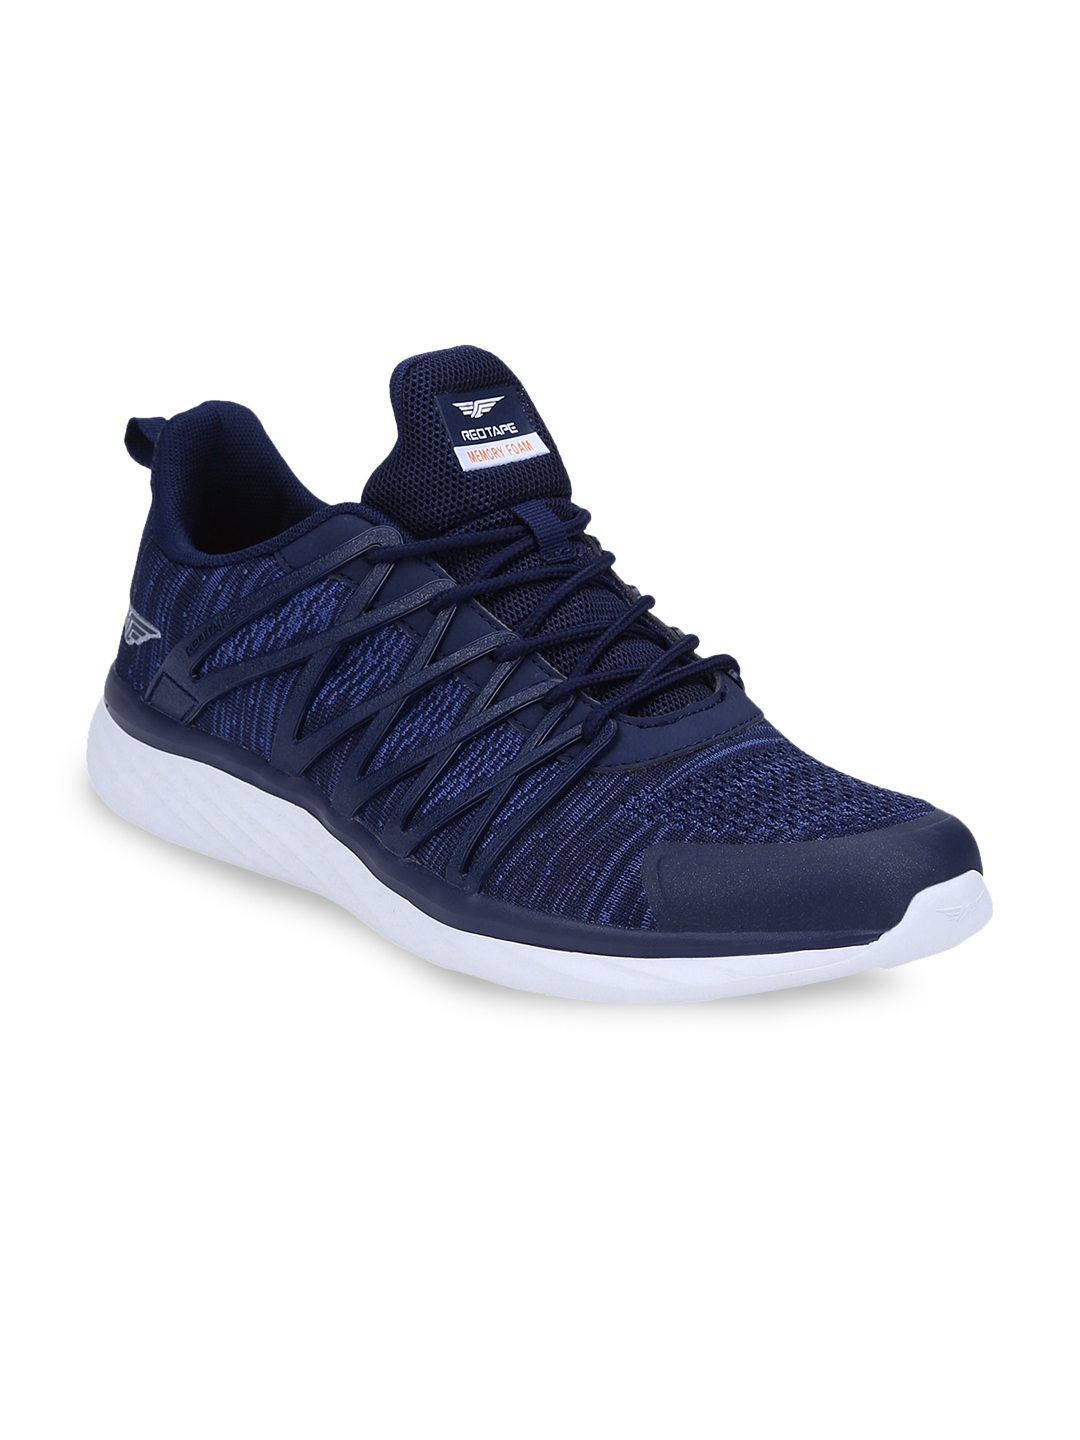 red tape athleisure range sports walking shoes